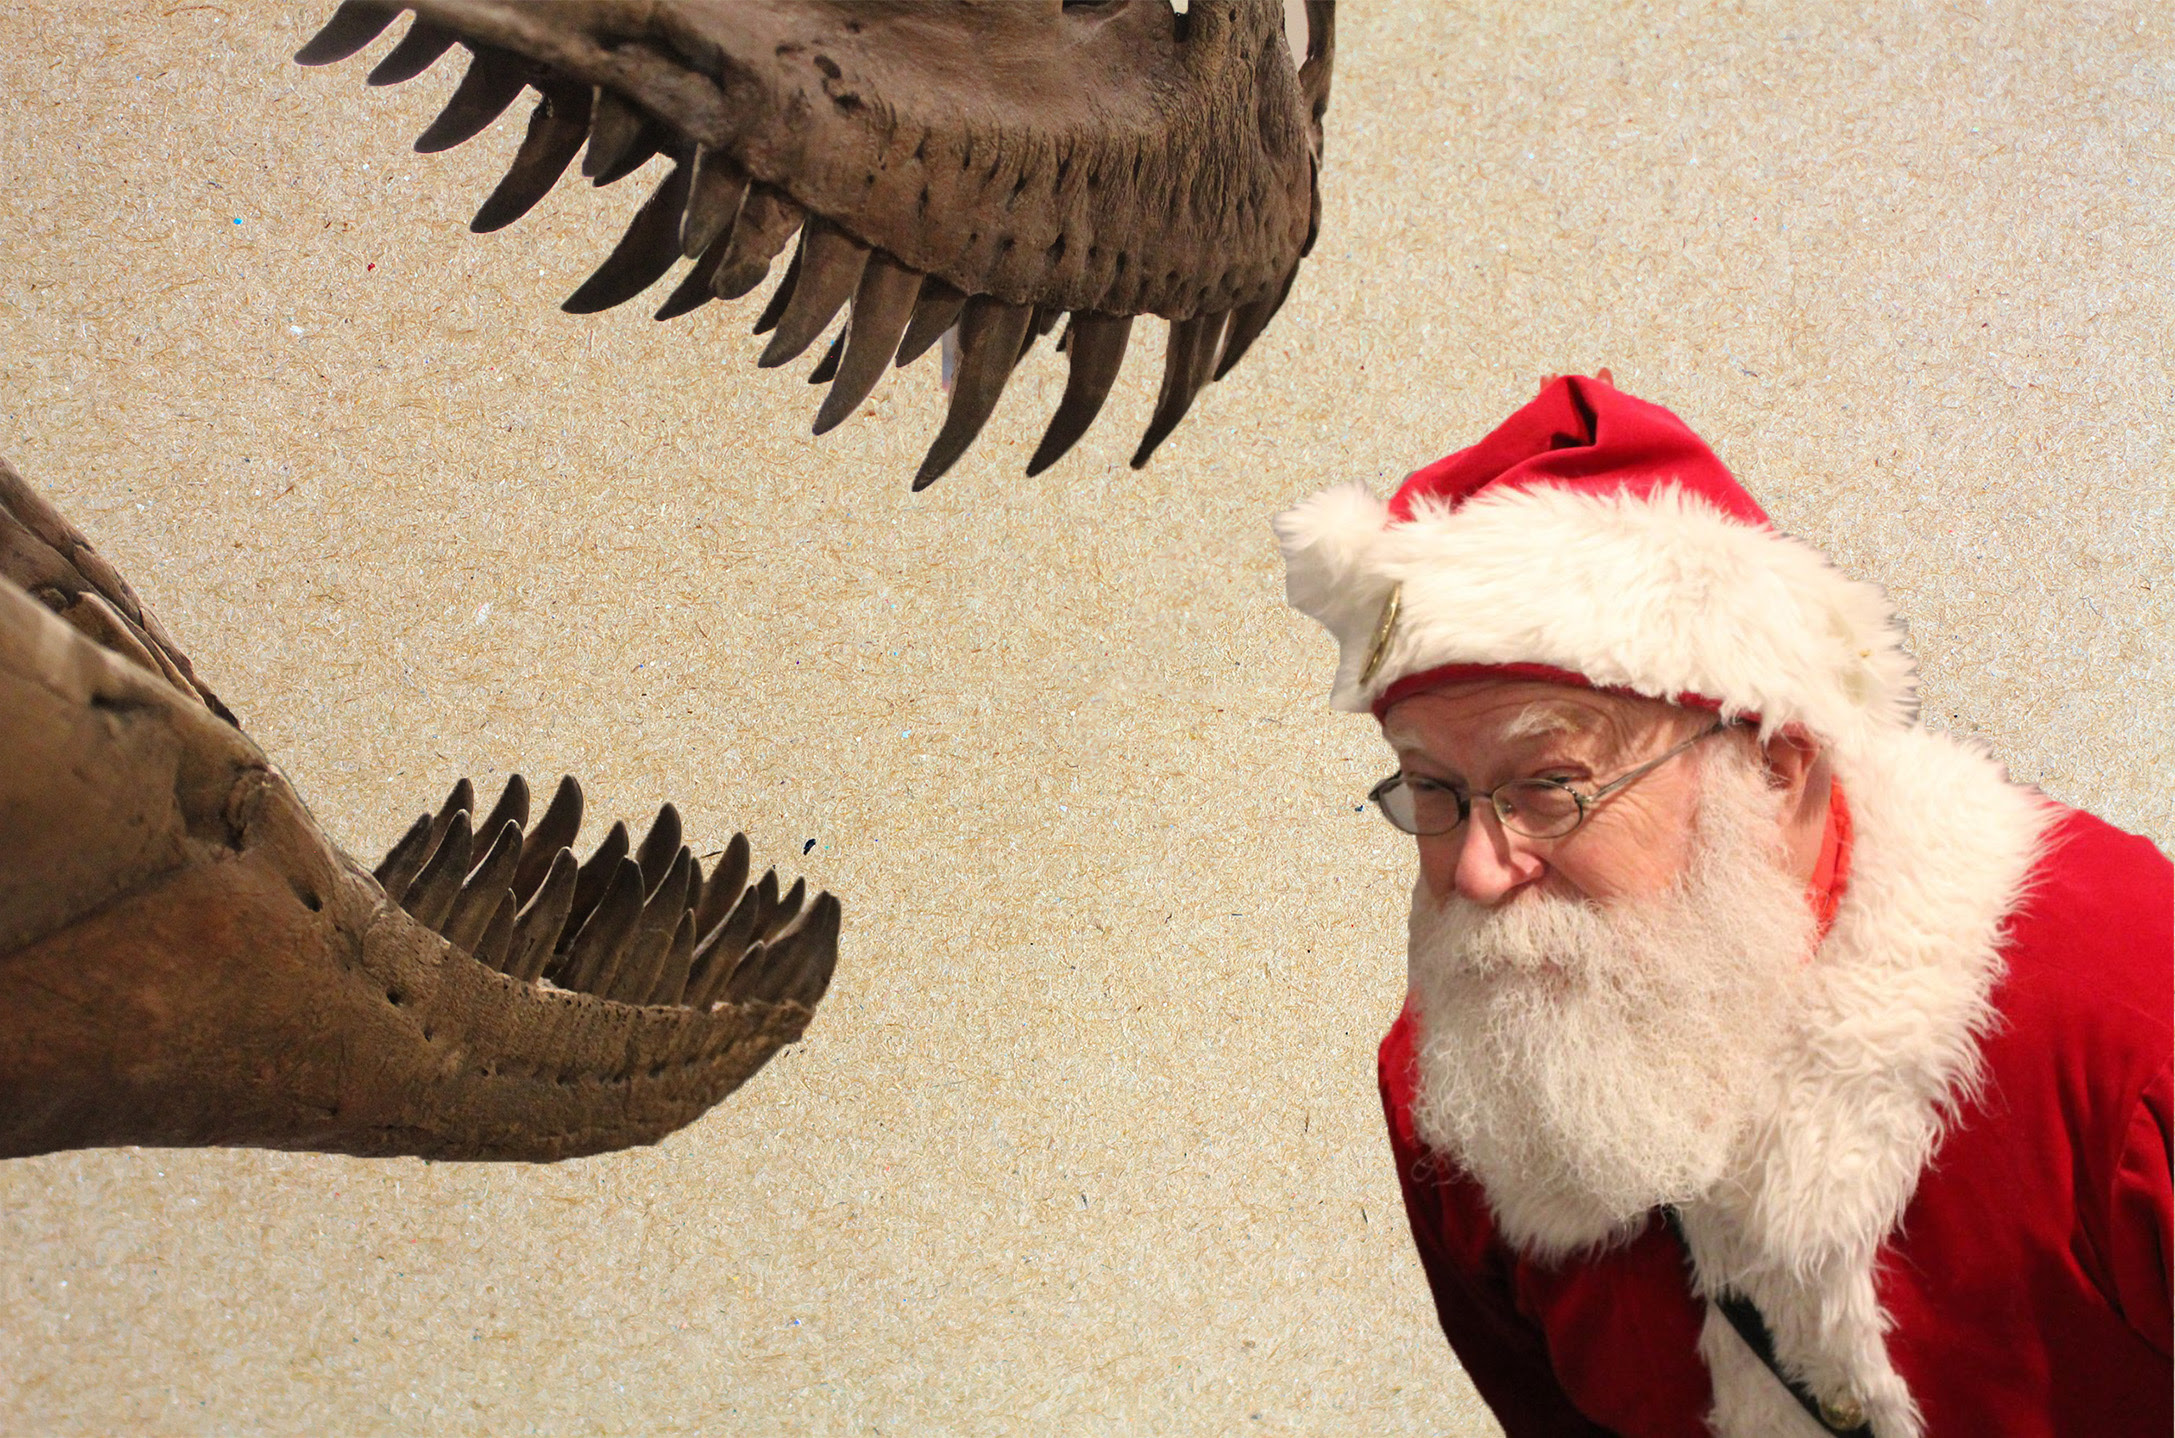 image of a Santa character next to a T-rex skeleton's head.